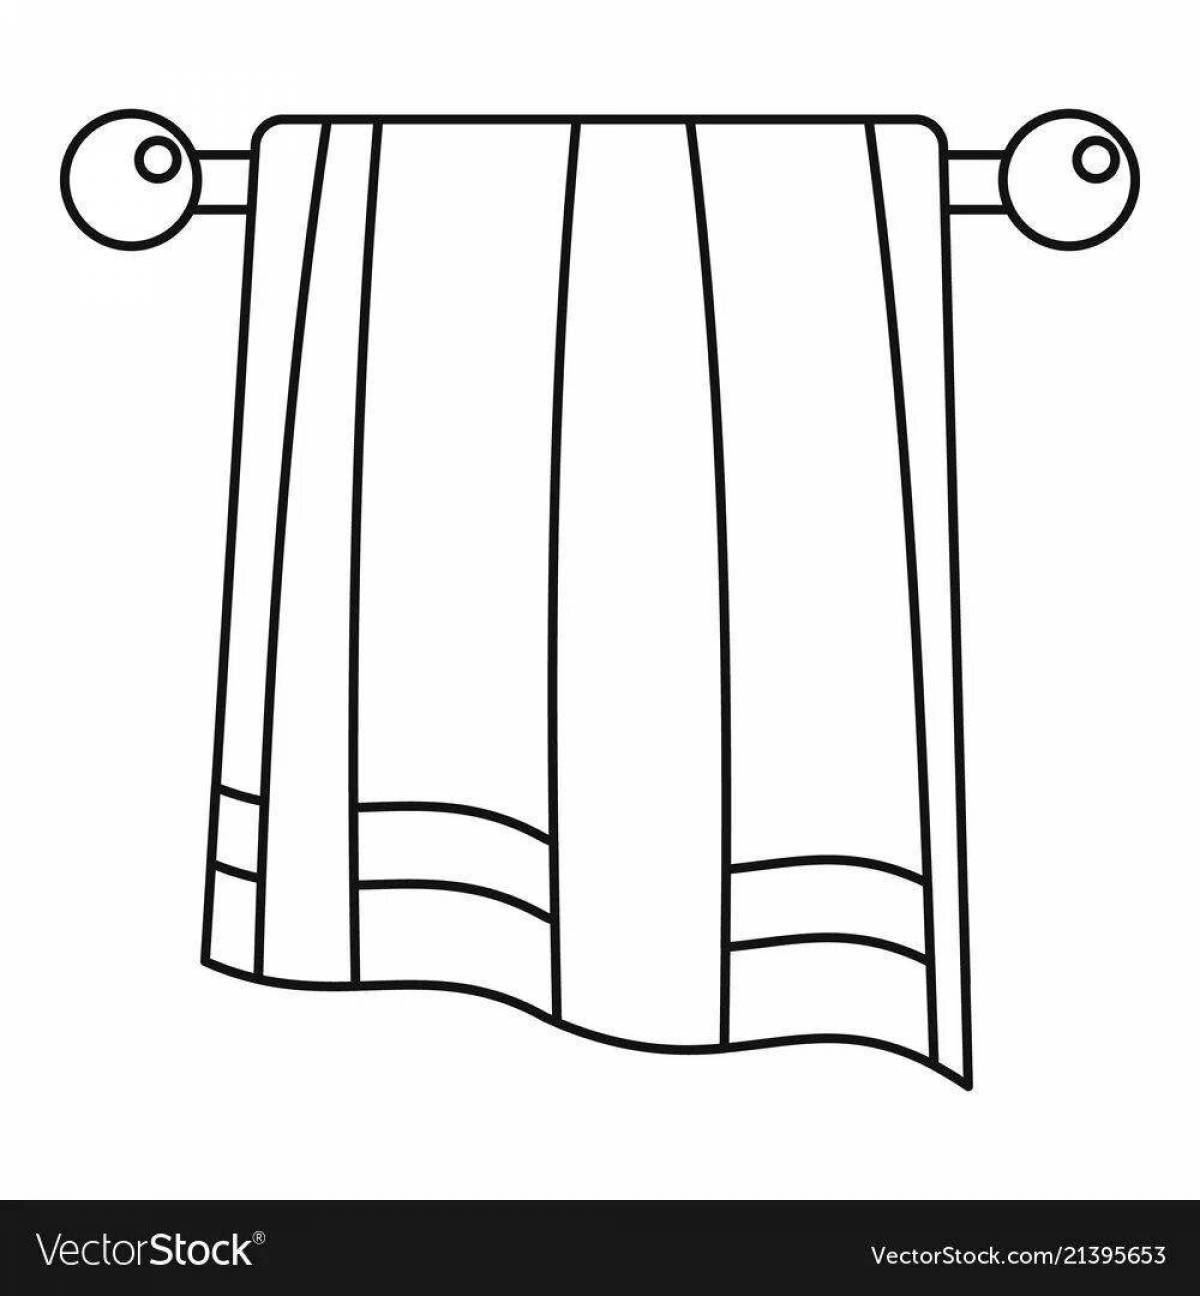 Playful coloring page of towels for kids